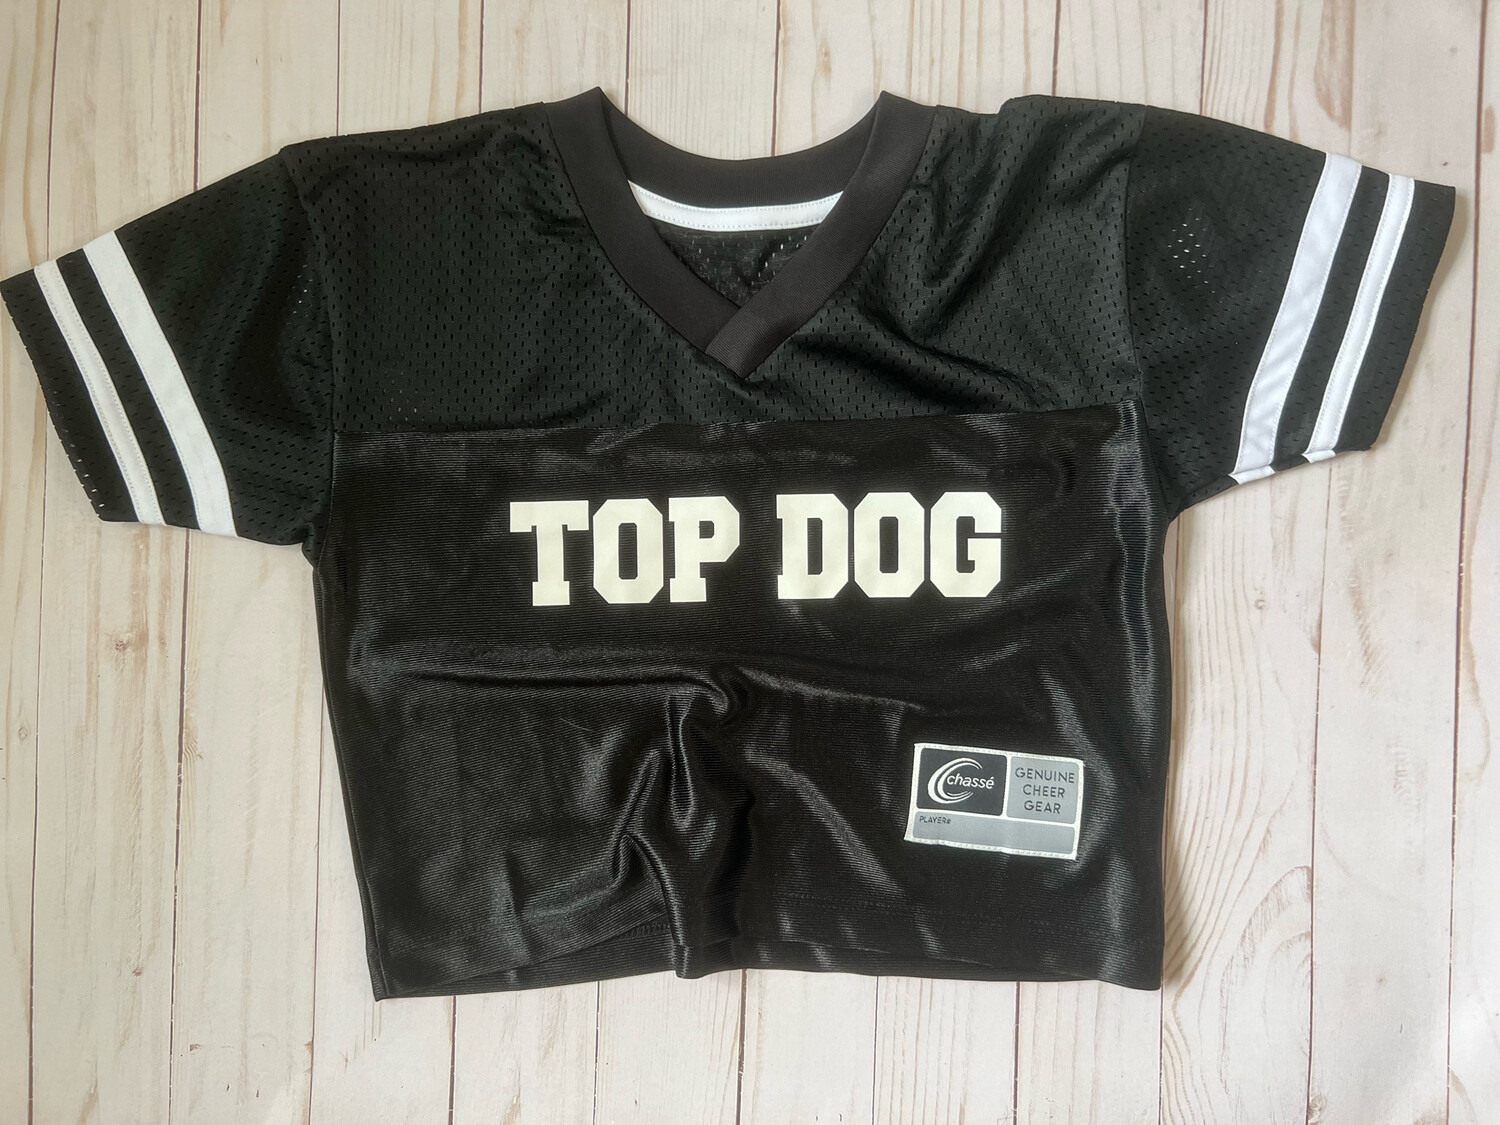 Cropped Football Jersey